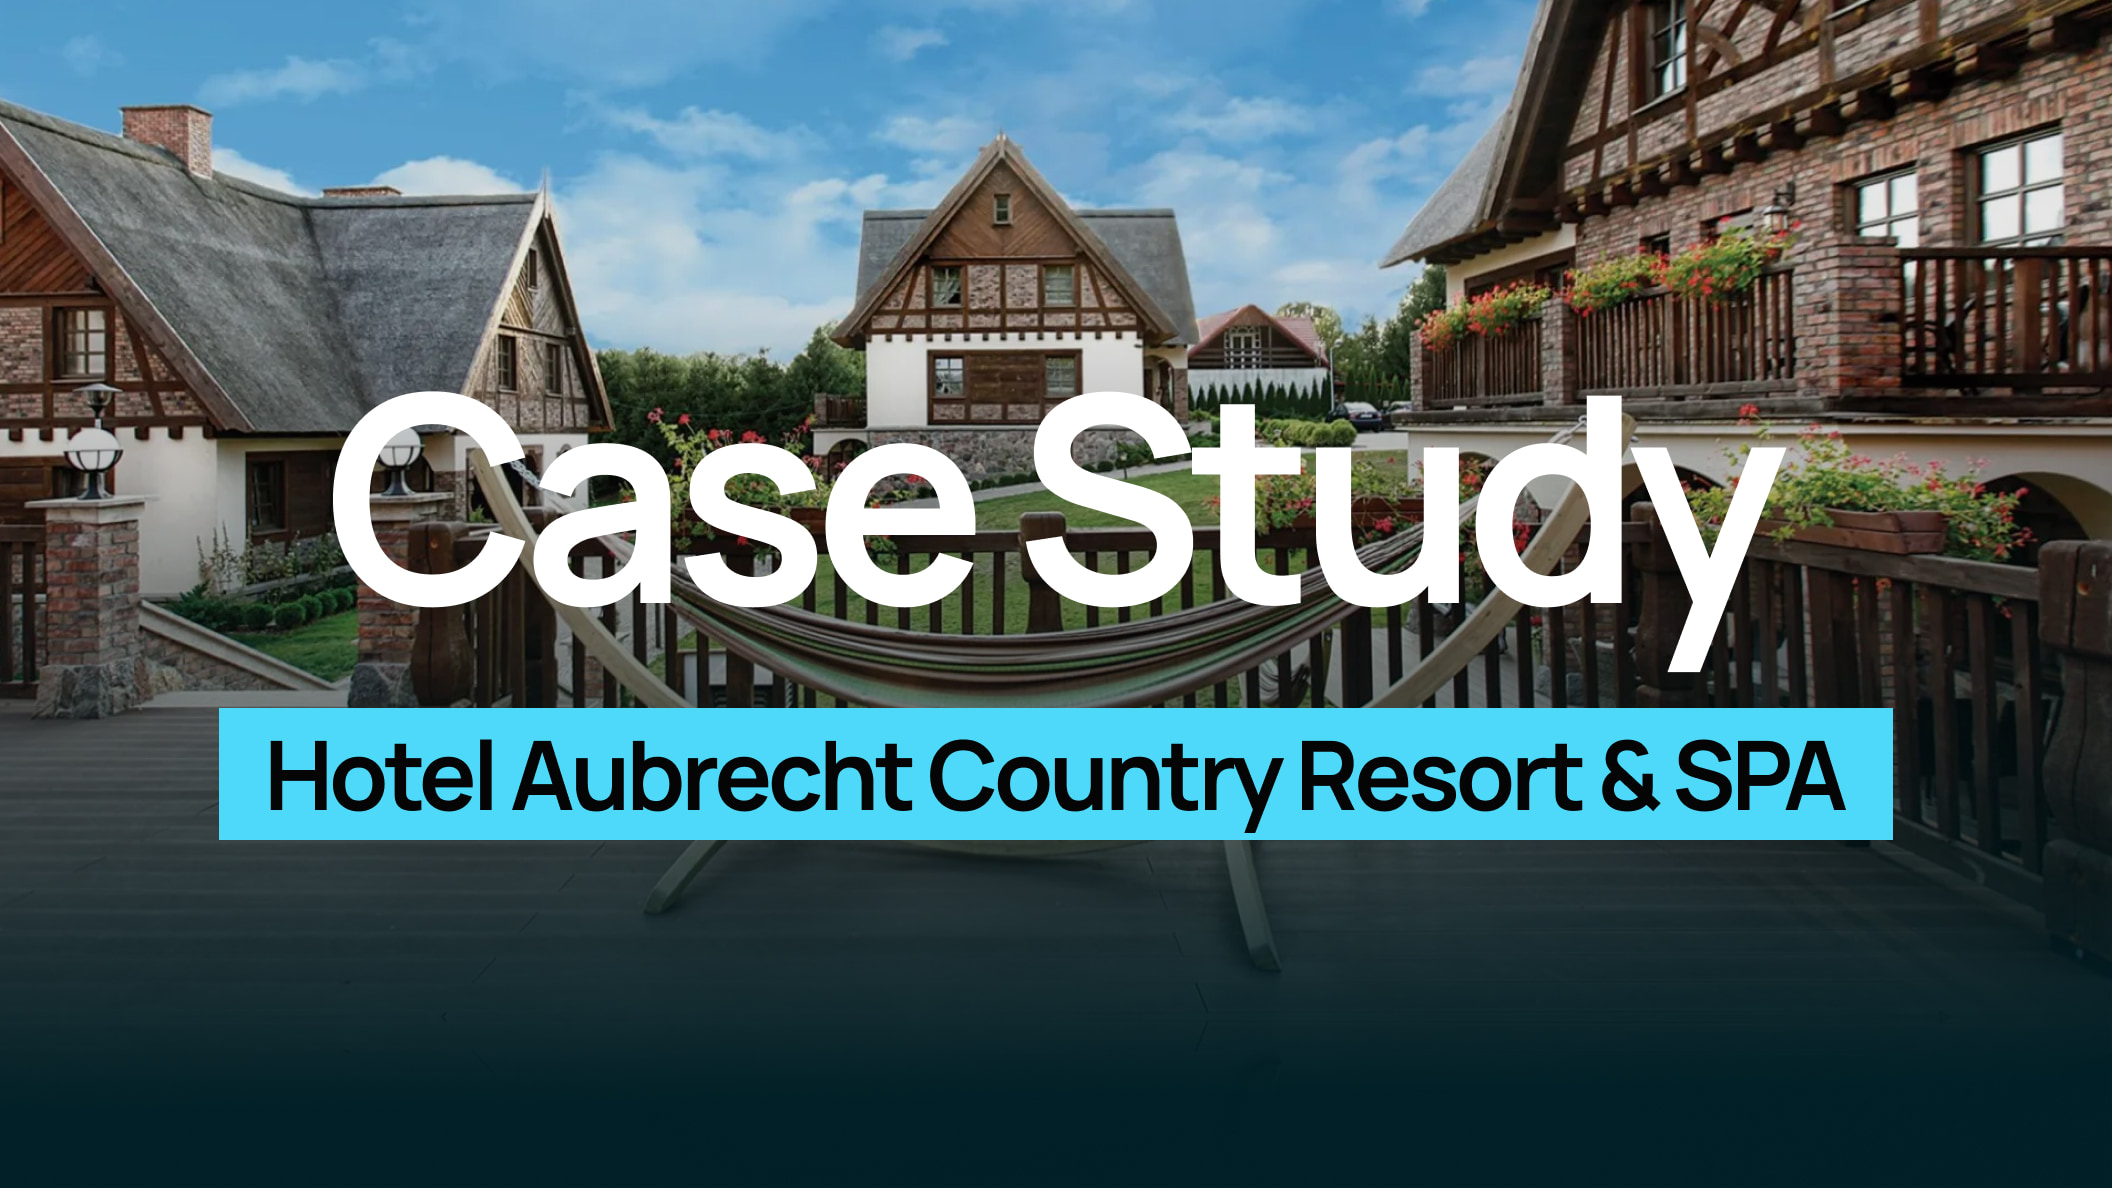 Hotel Aubrecht: Relaxation away from civilization